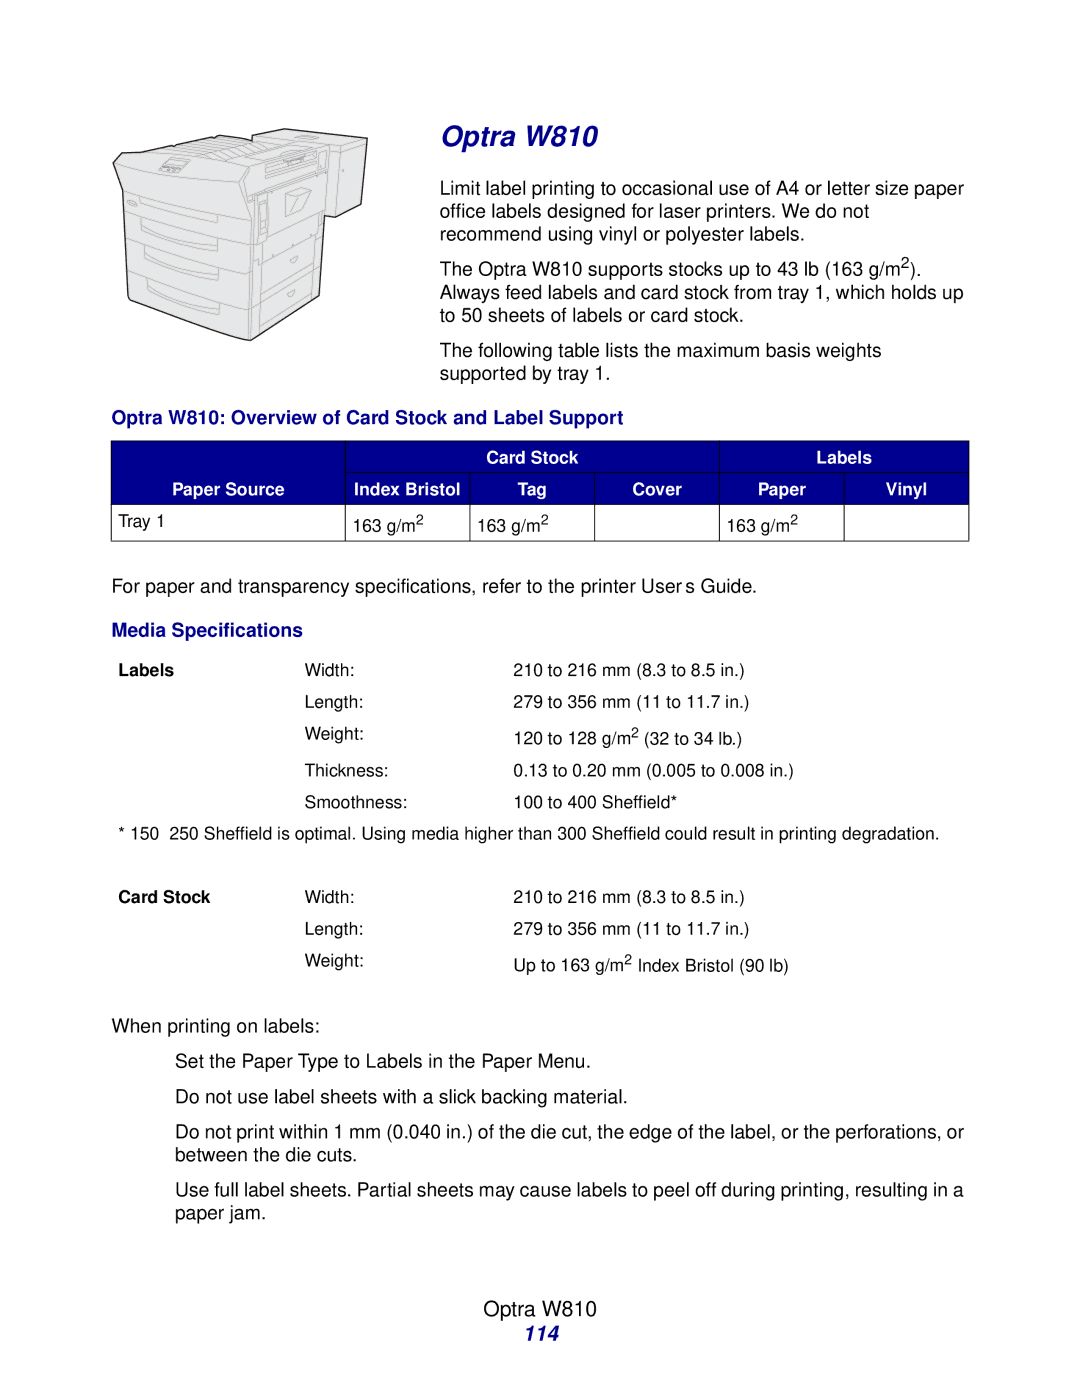 Lexmark Laser Printers manual 114, Optra W810 Overview of Card Stock and Label Support, Cover Paper Vinyl Tray 163 g/m2 